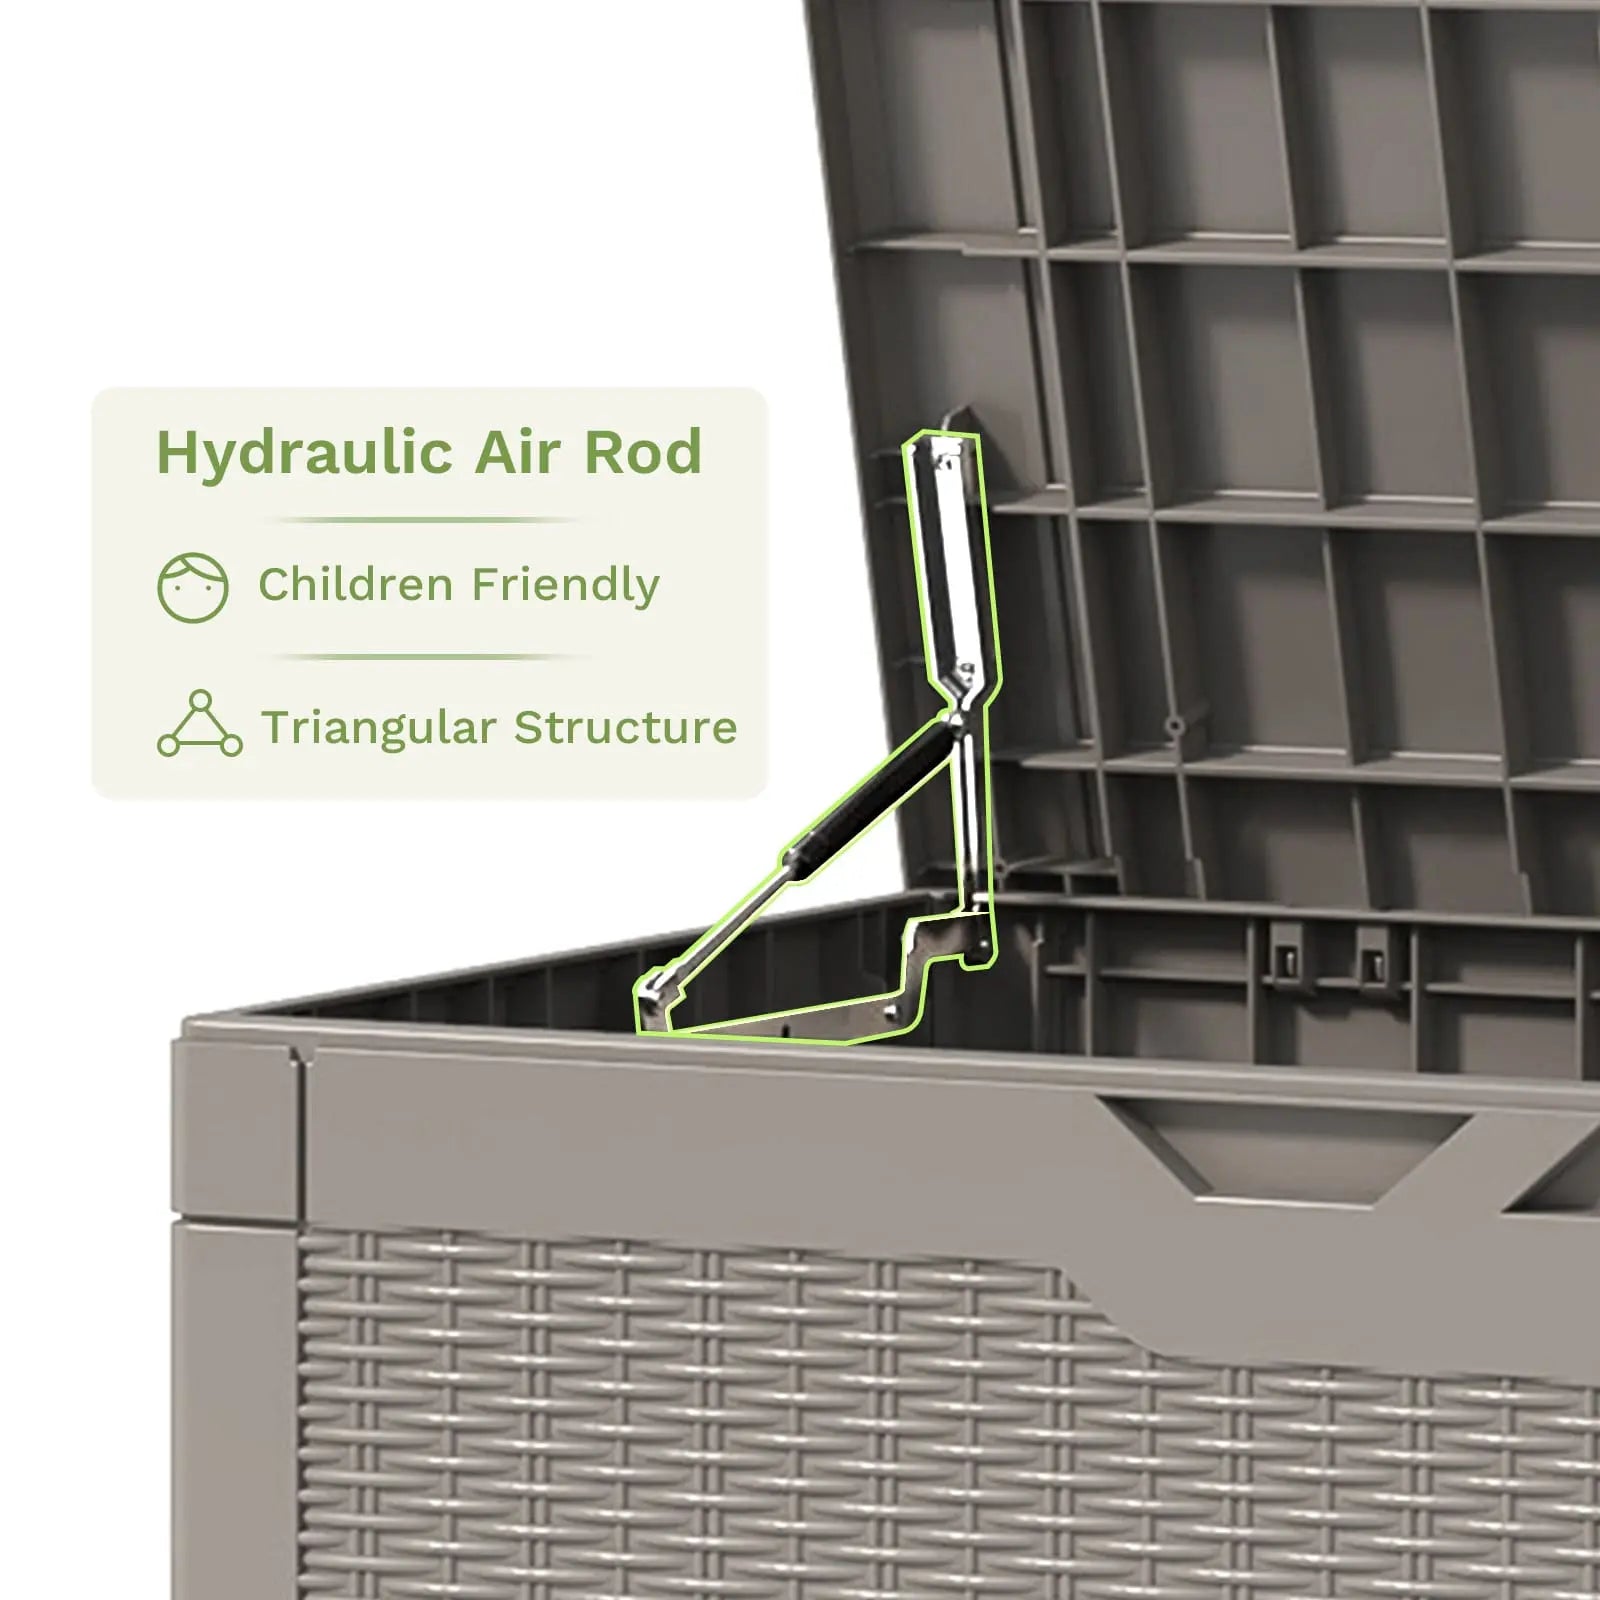 The 100 gallon ourdoor storage deck box features in hydraulic air rod design